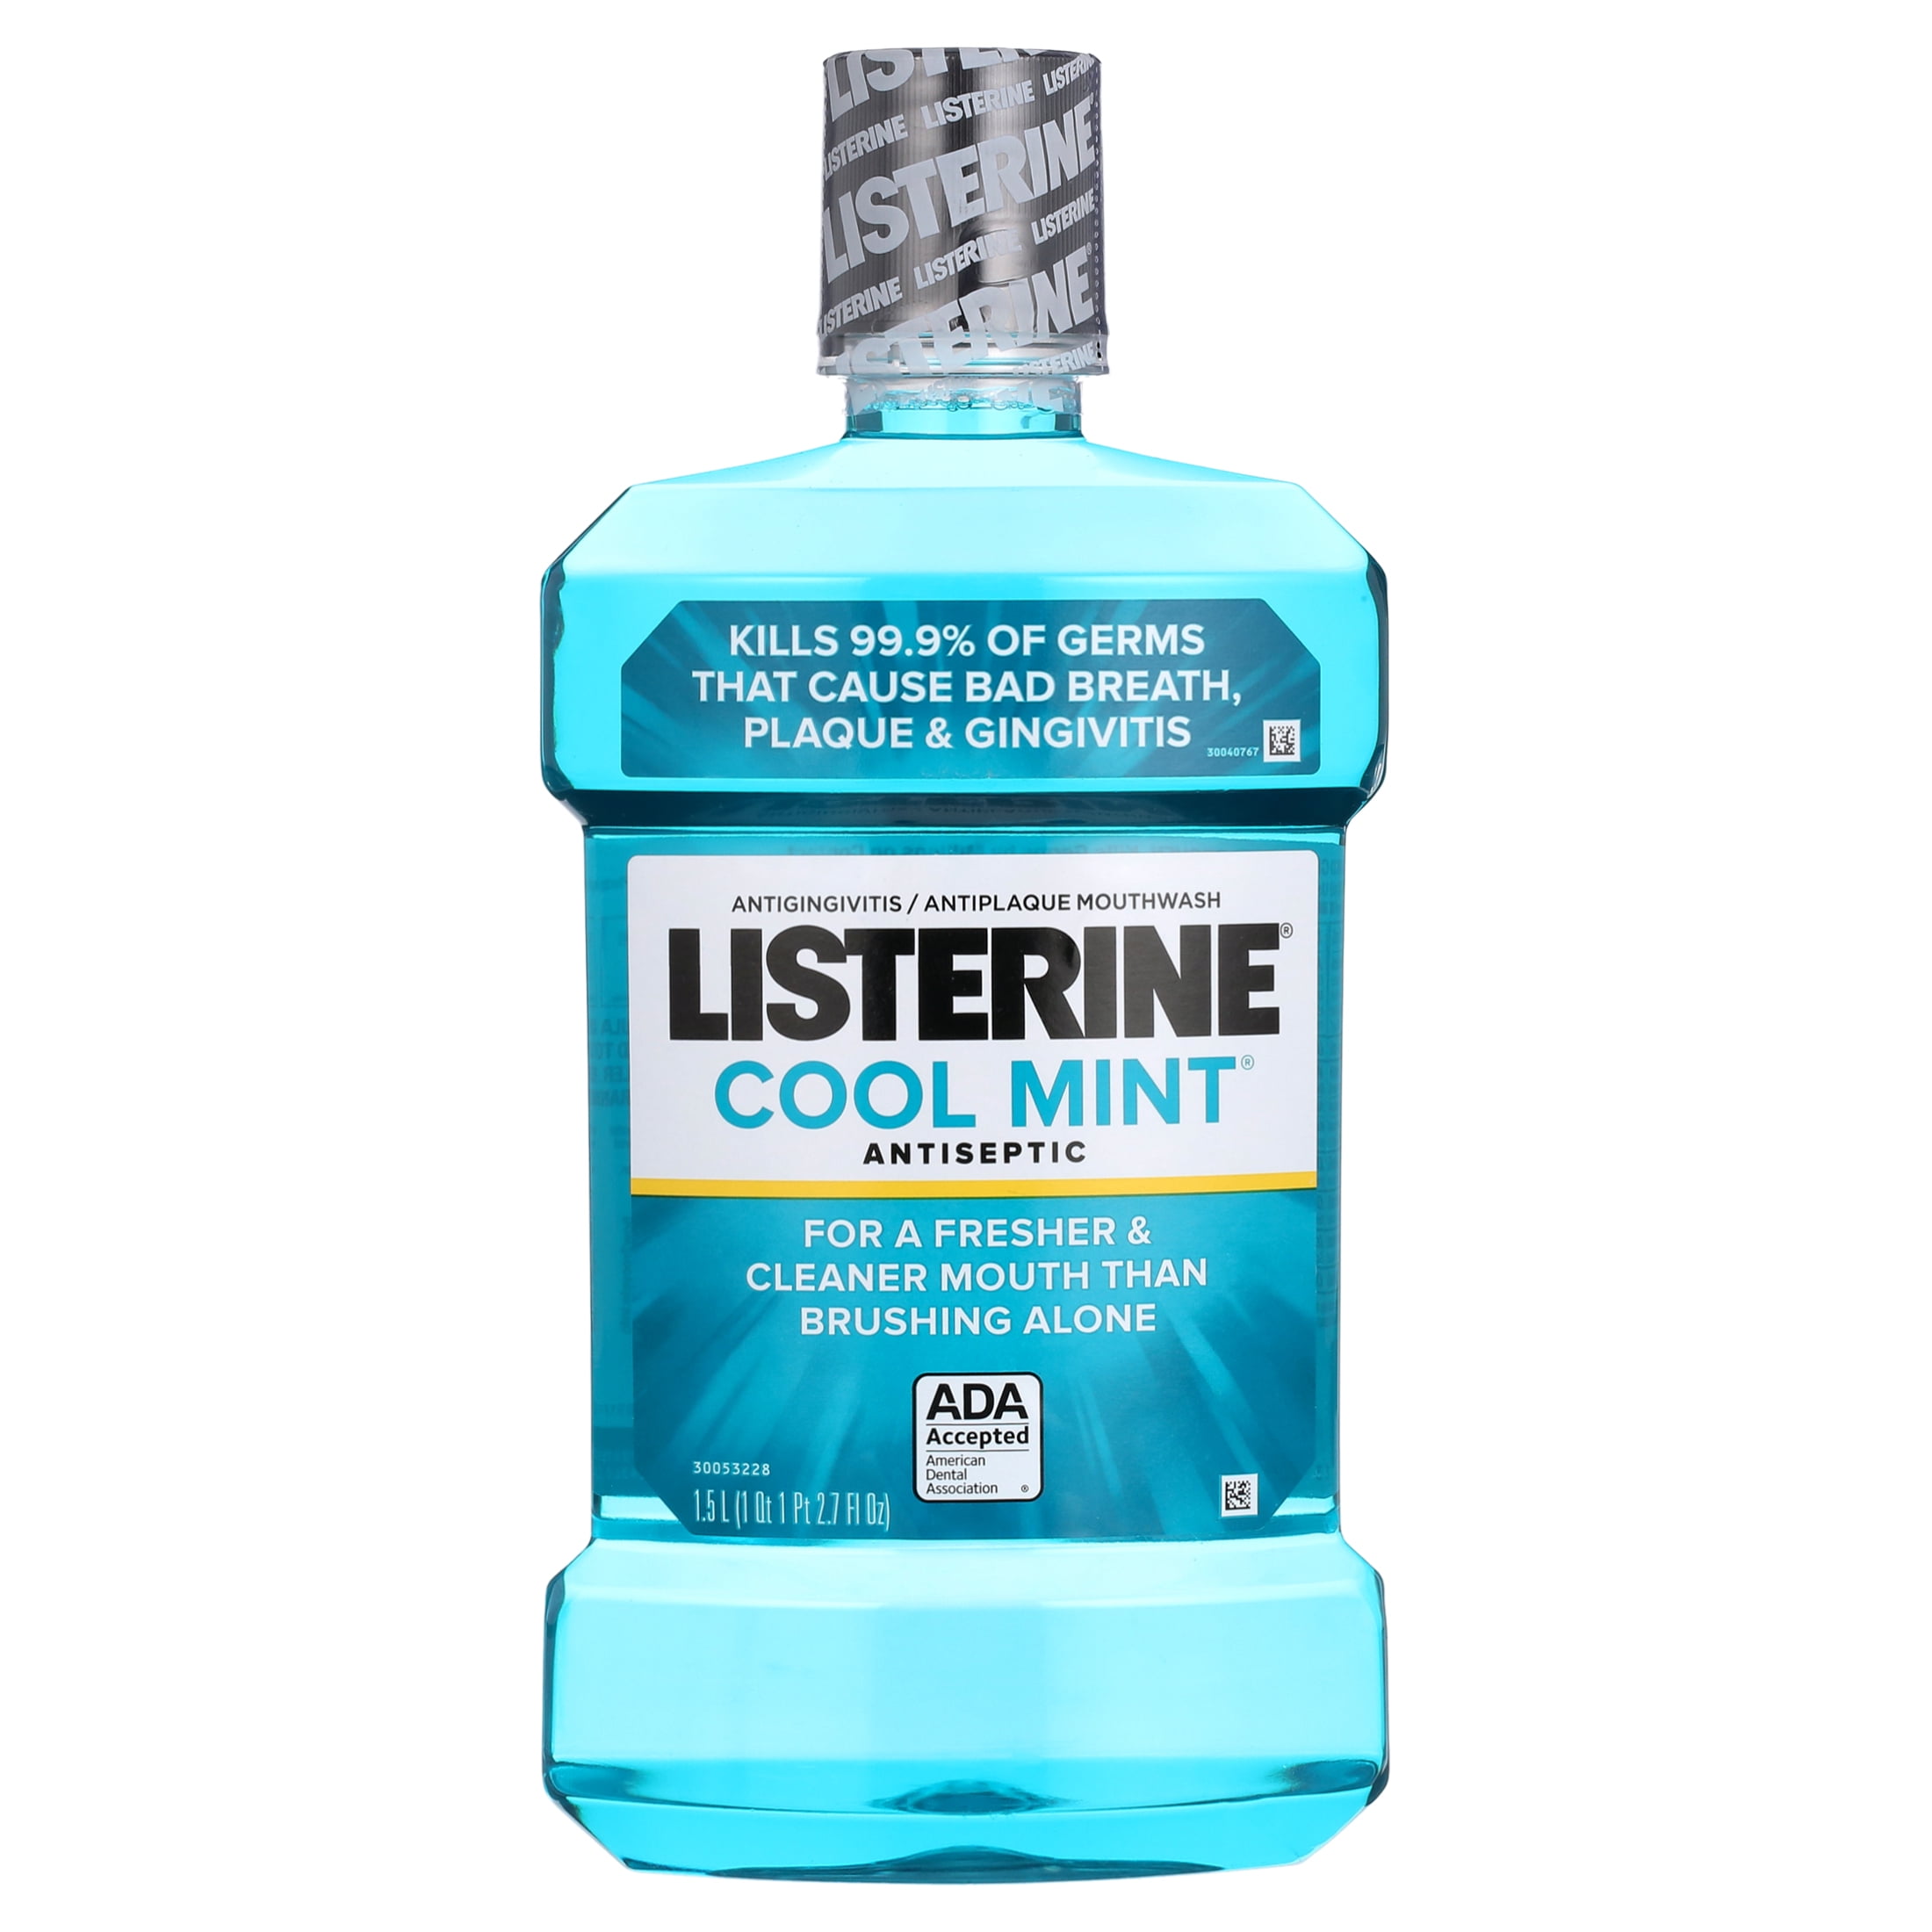 Listerine Cool Mint Antiseptic Mouthwash to Kill 99% of Bad Breath Germs  and Gum Therapy Mouthwash in Glacier Mint to Help Reverse Signs of Early